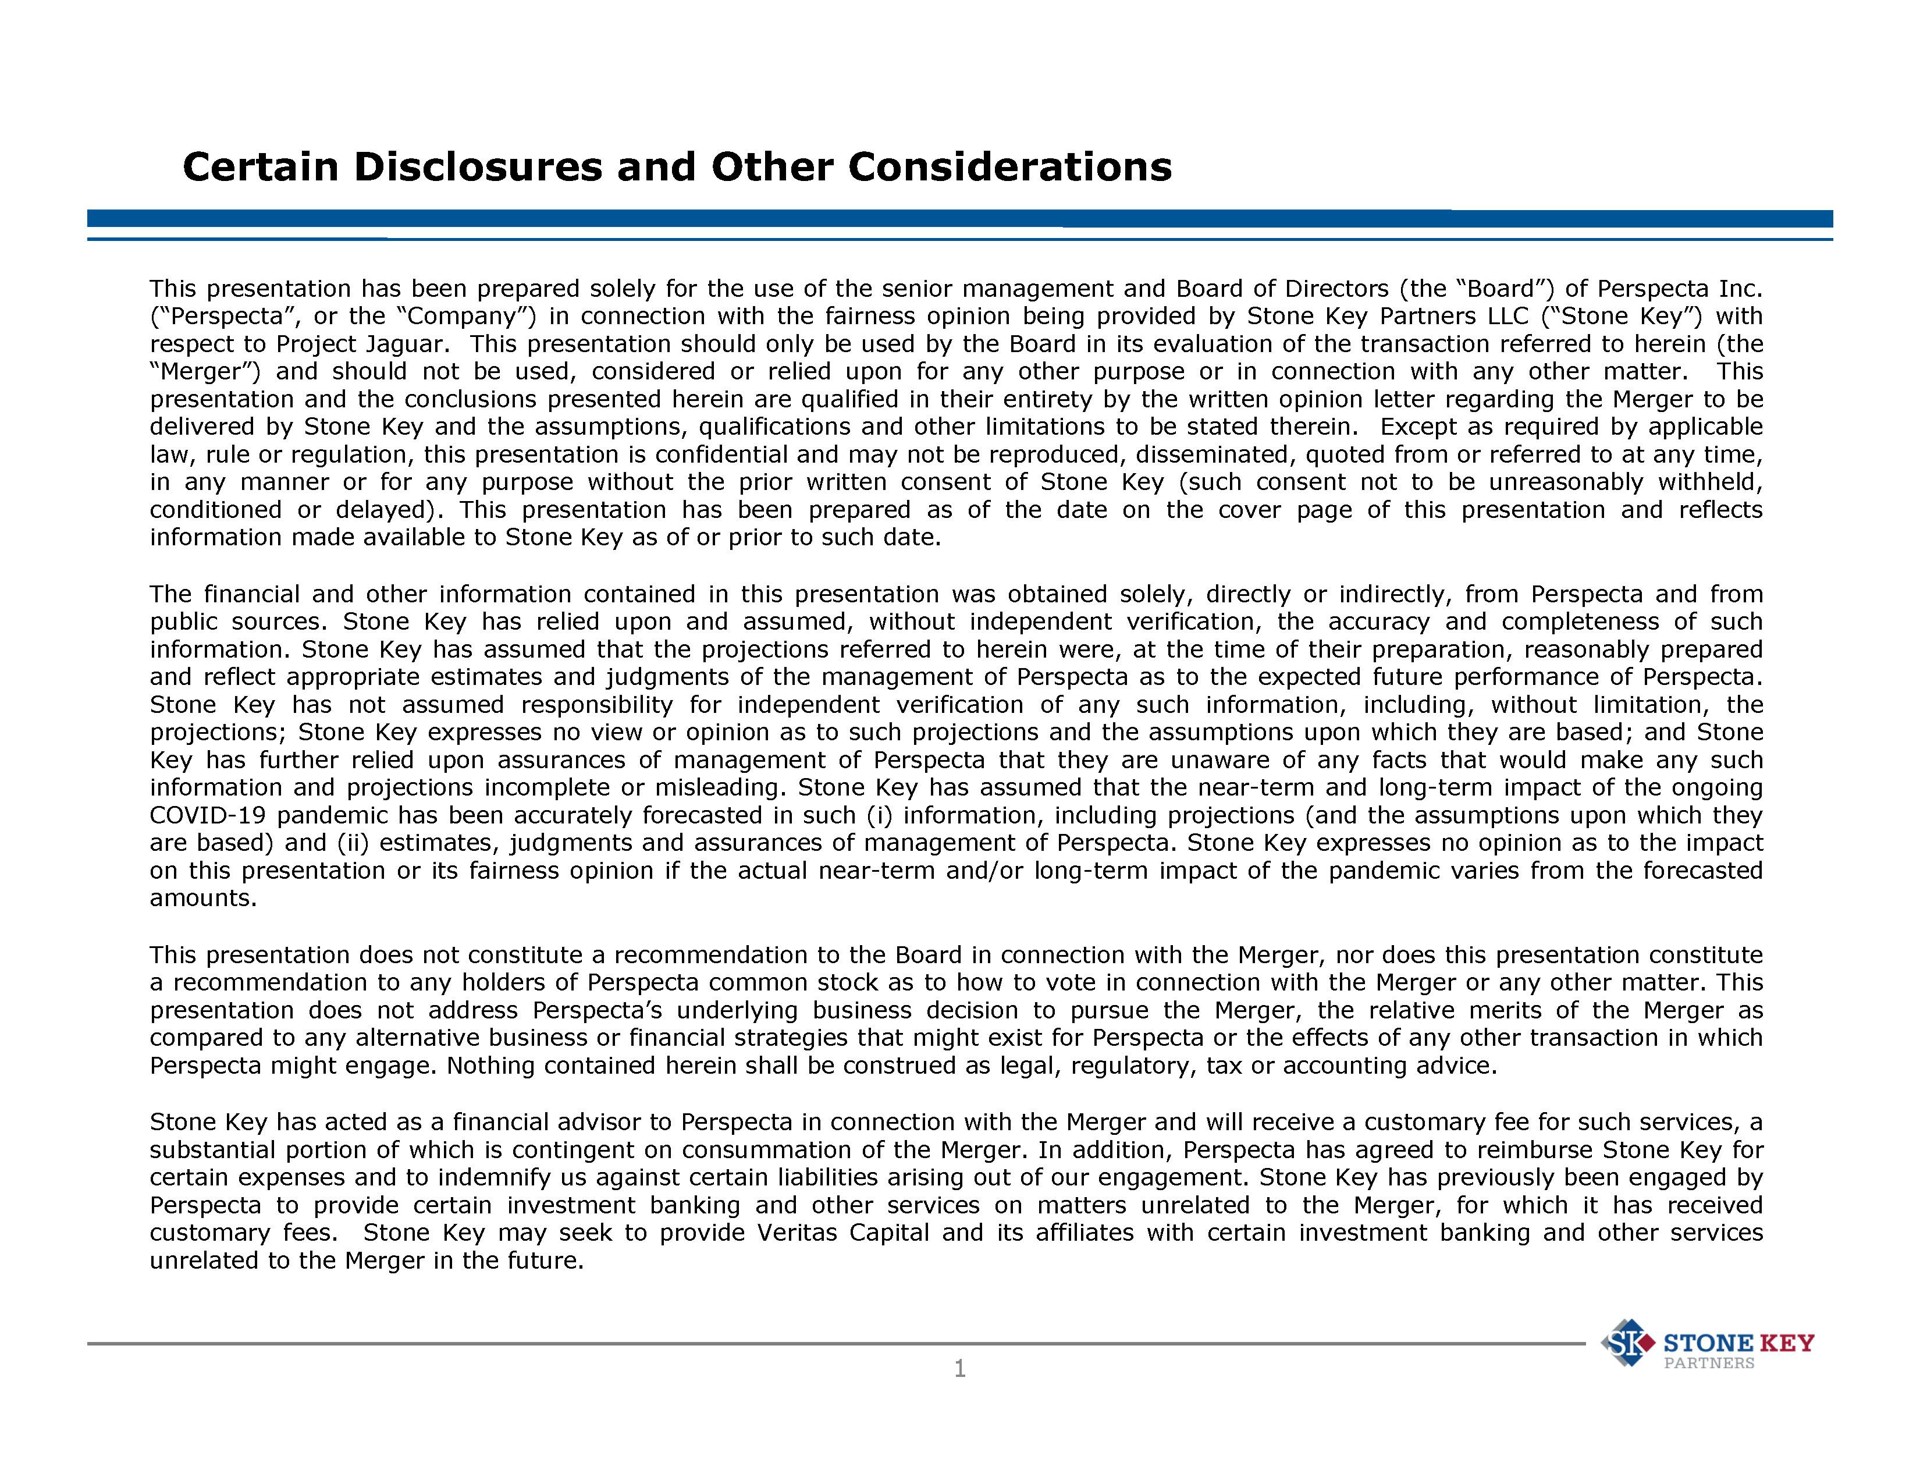 certain disclosures and other considerations sie stone key | Stone Key Partners